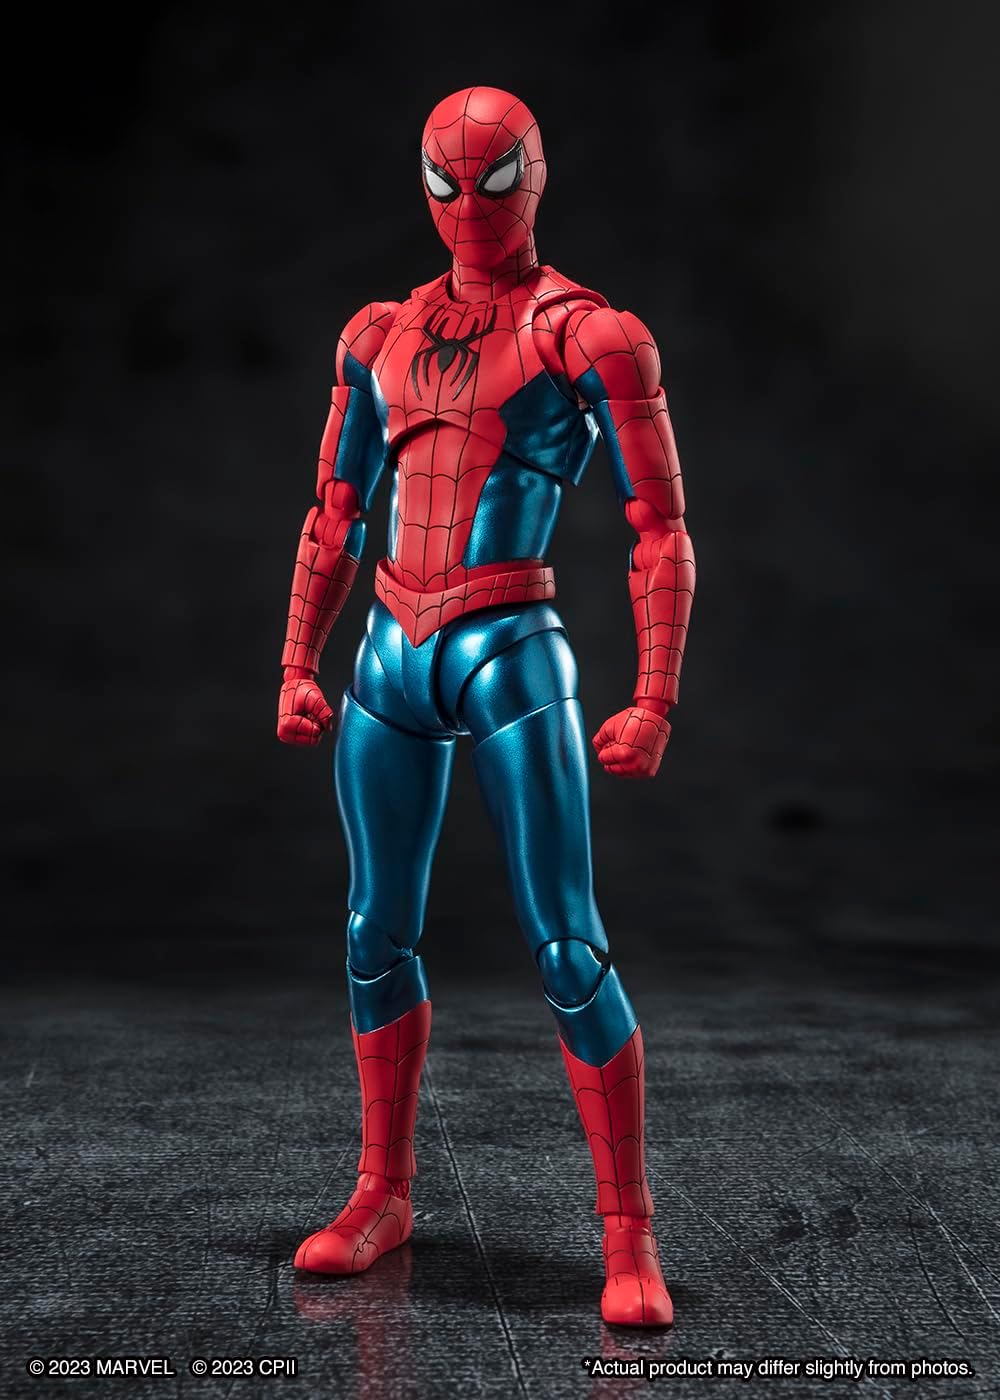 PRE-ORDER - Spider-Man: No Way Home- S.H.Figuarts Spider-Man (New Red & Blue Suit) “Final Swing Suit”